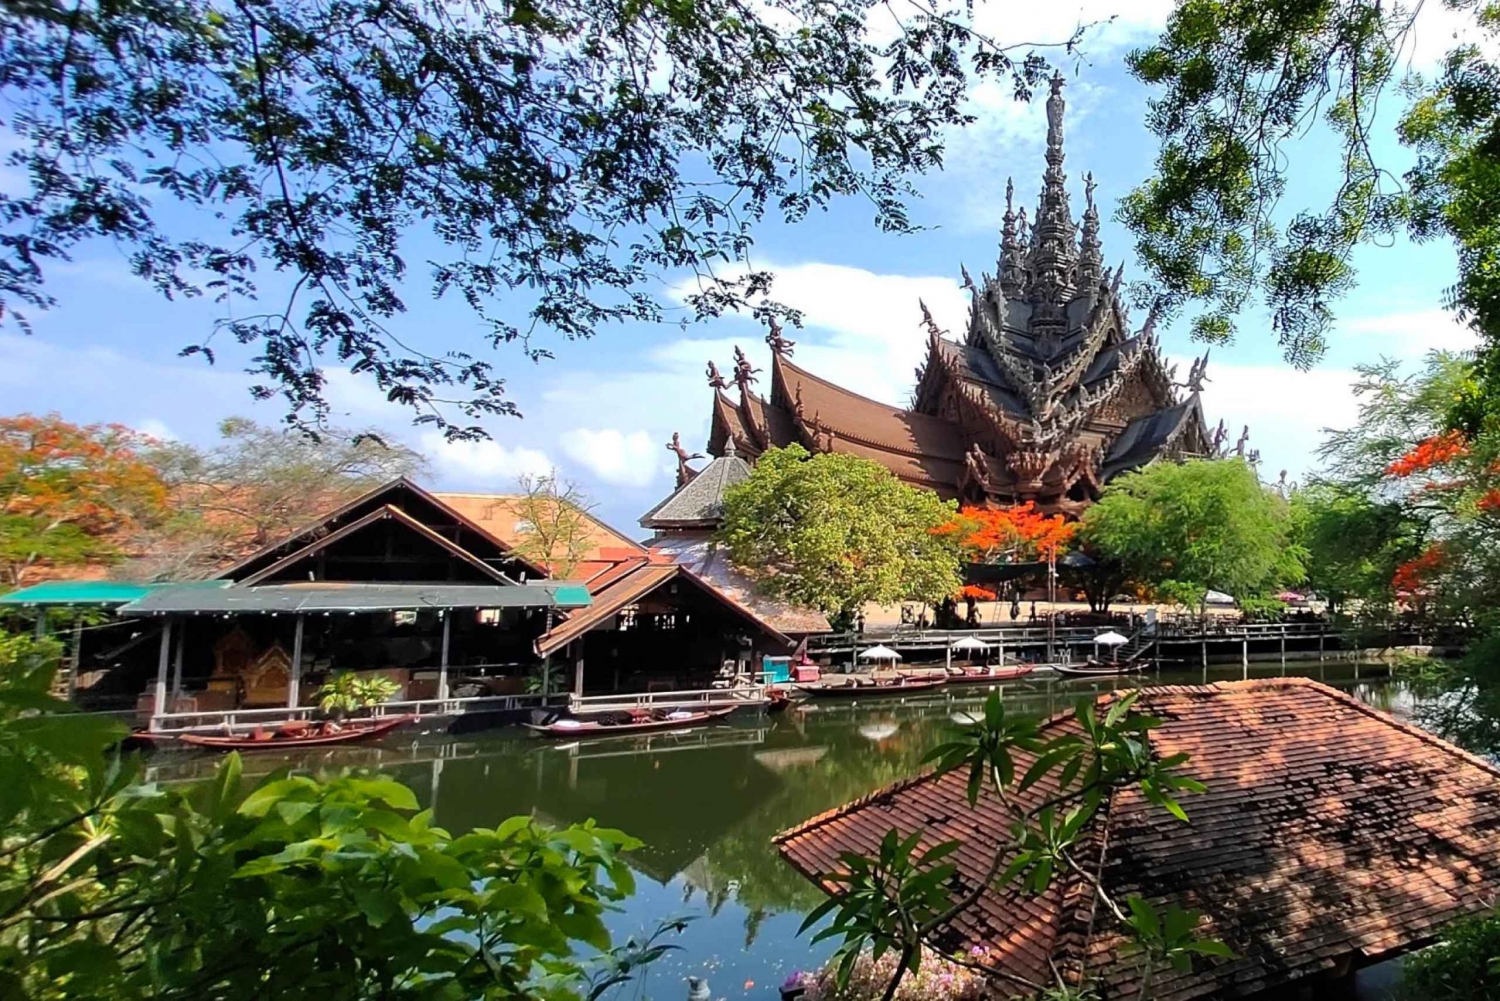 Pattaya: The Sanctuary of Truth Discounted Admission Ticket